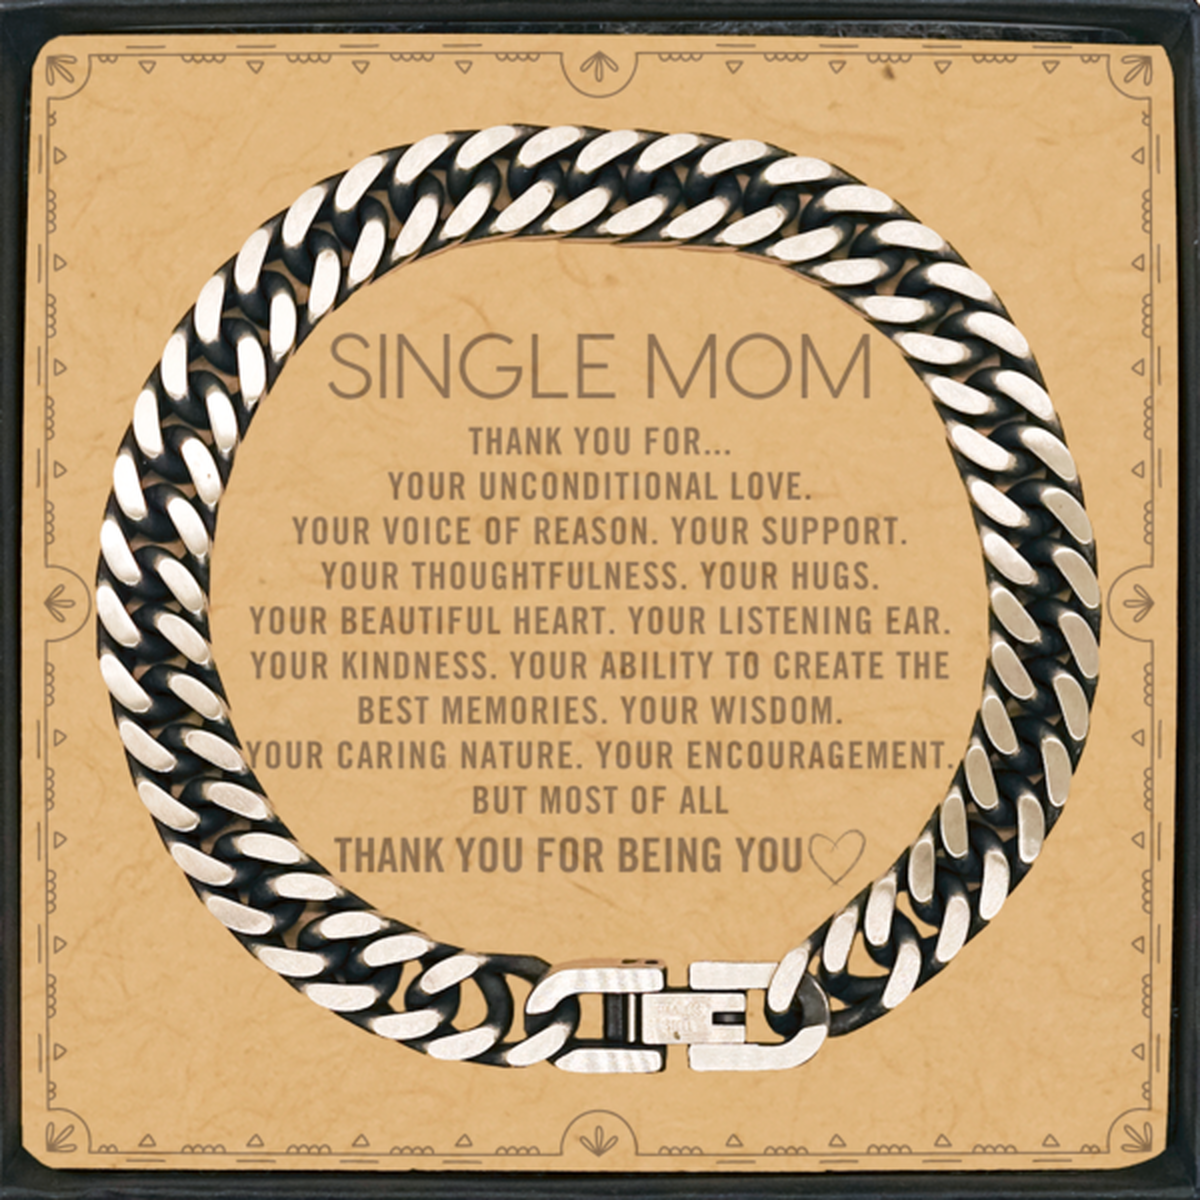 Single Mom Cuban Link Chain Bracelet Custom, Message Card Gifts For Single Mom Christmas Graduation Birthday Gifts for Men Women Single Mom Thank you for Your unconditional love